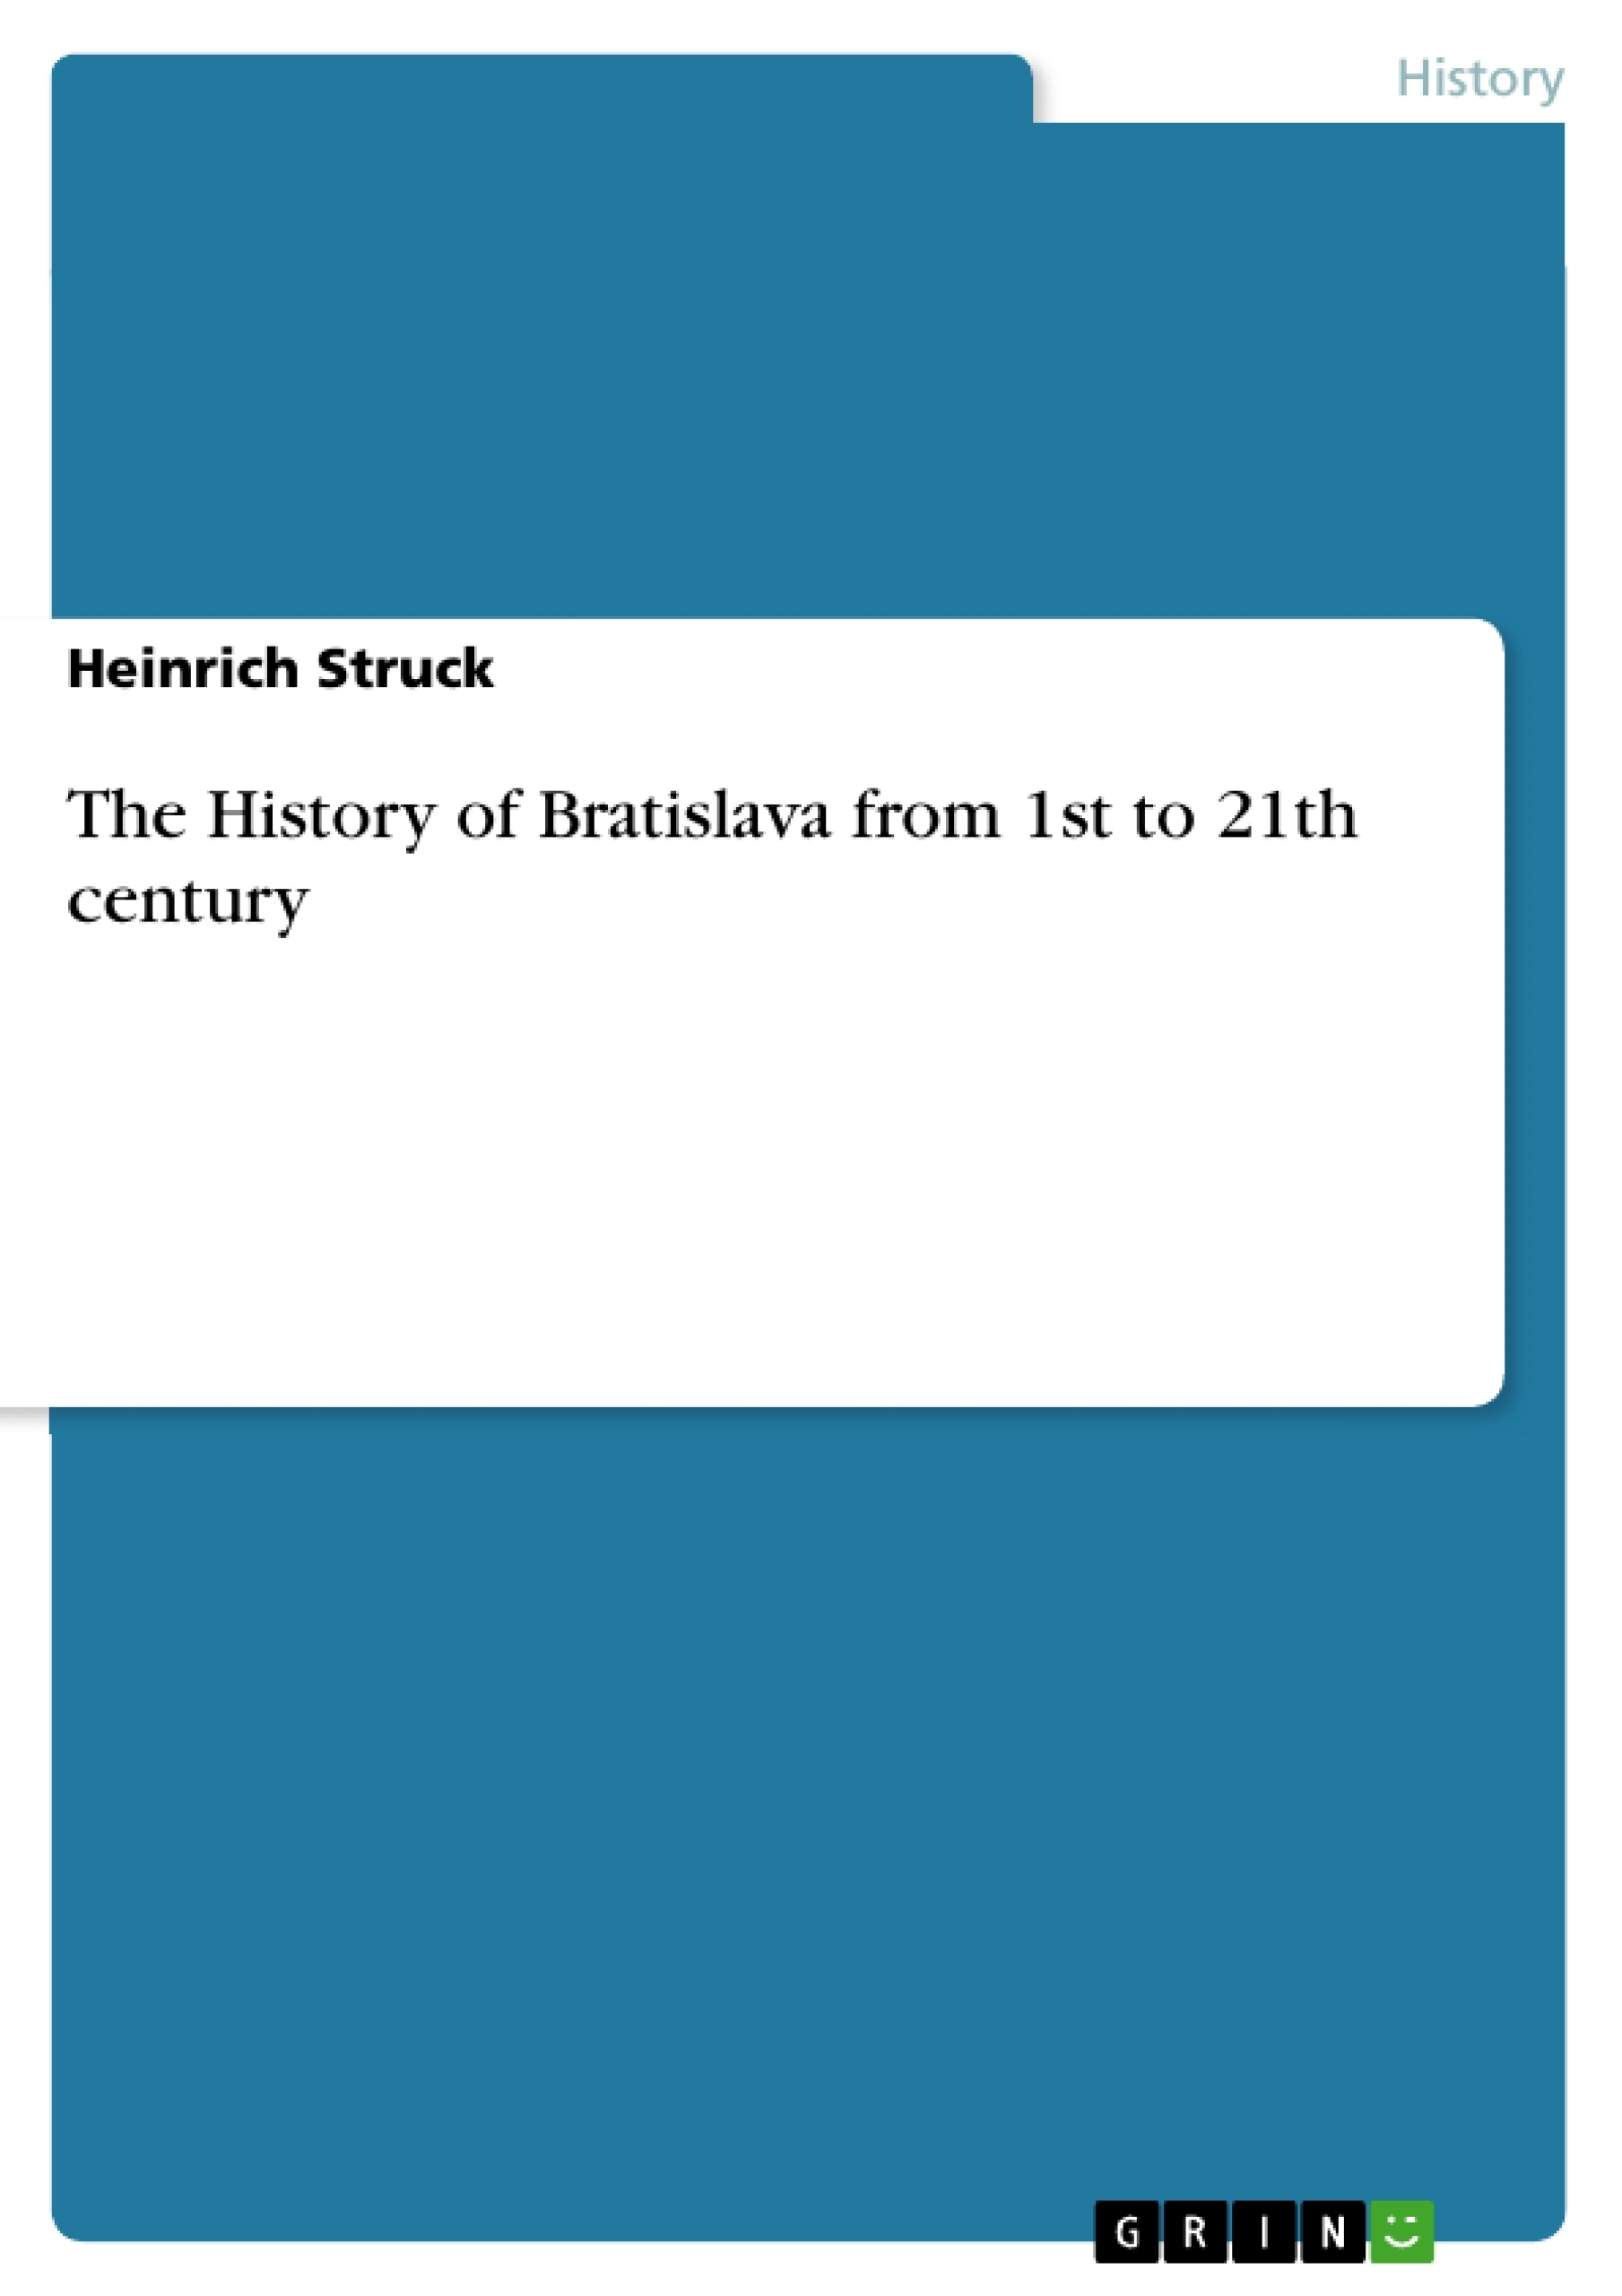 Titel: The History of Bratislava from 1st to 21th century